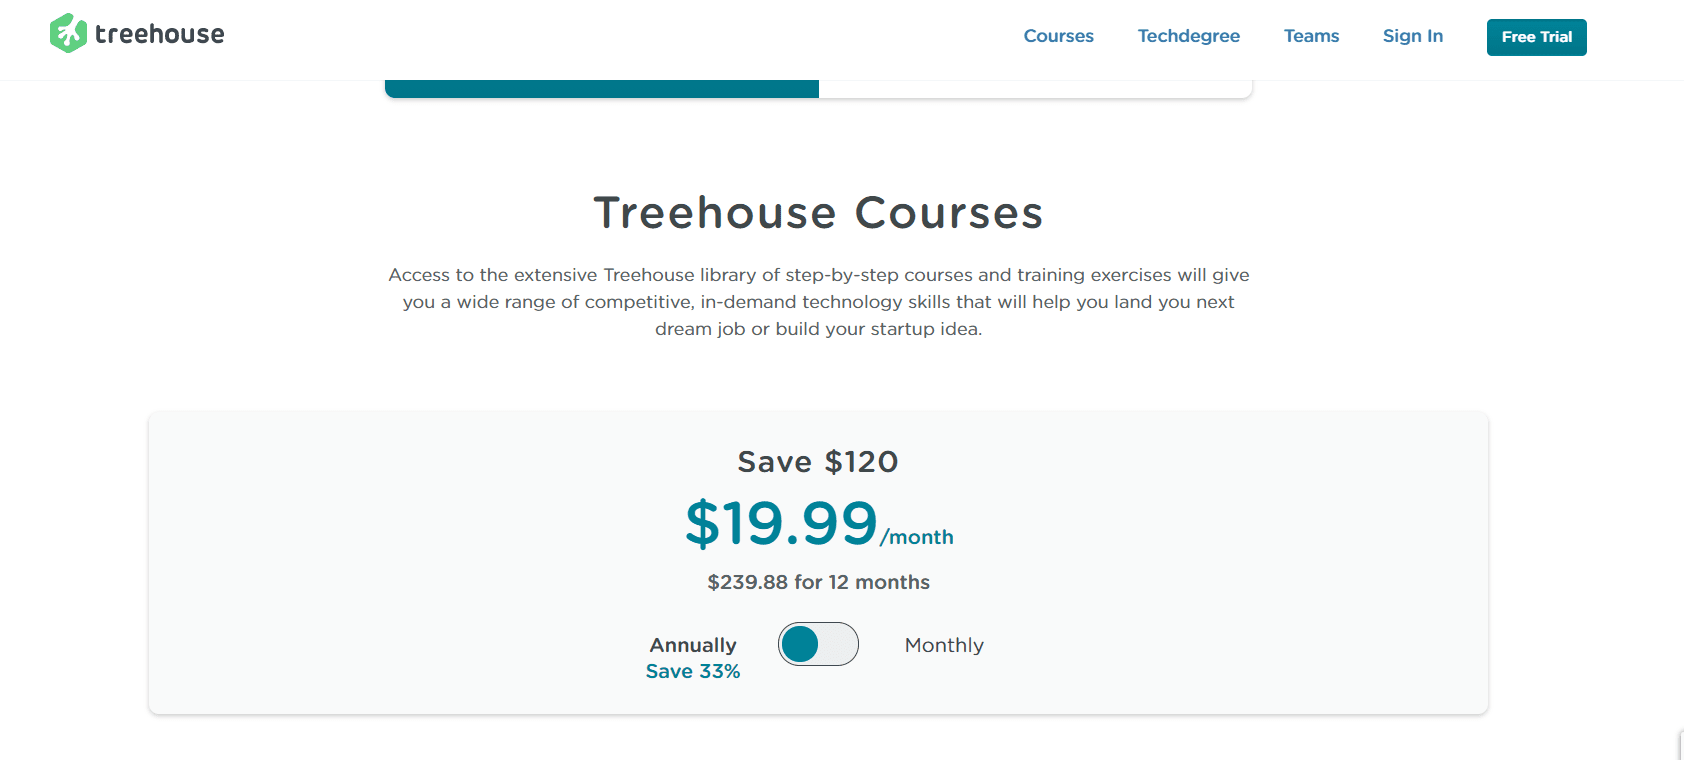 Treehouse-Pricing